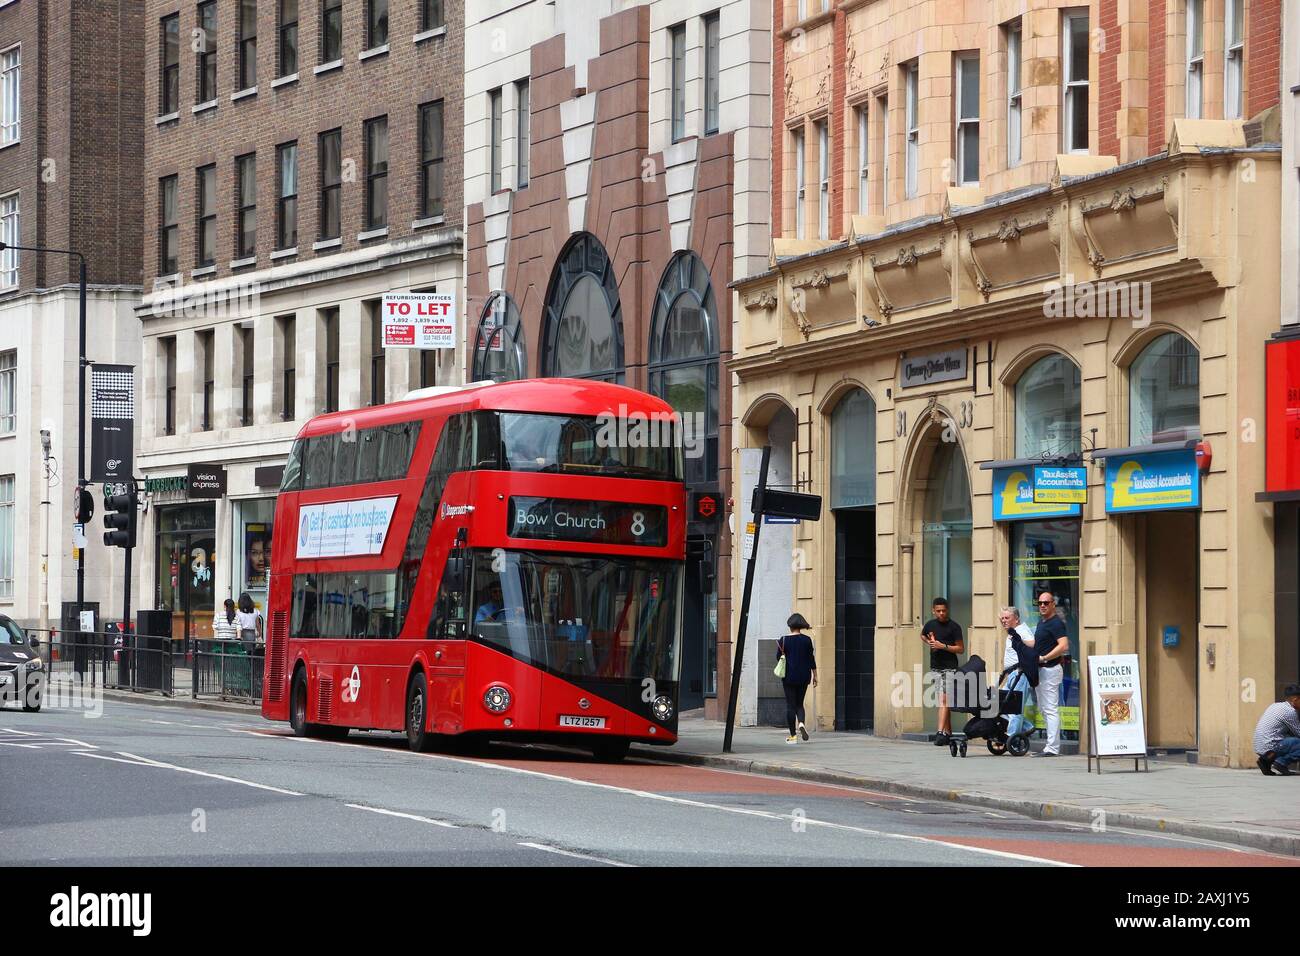 LONDON, UK - JULY 9, 2016: New Routemaster bus in Holborn, London. The hybrid diesel-electric bus is a new, modern version of iconic double decker. Stock Photo